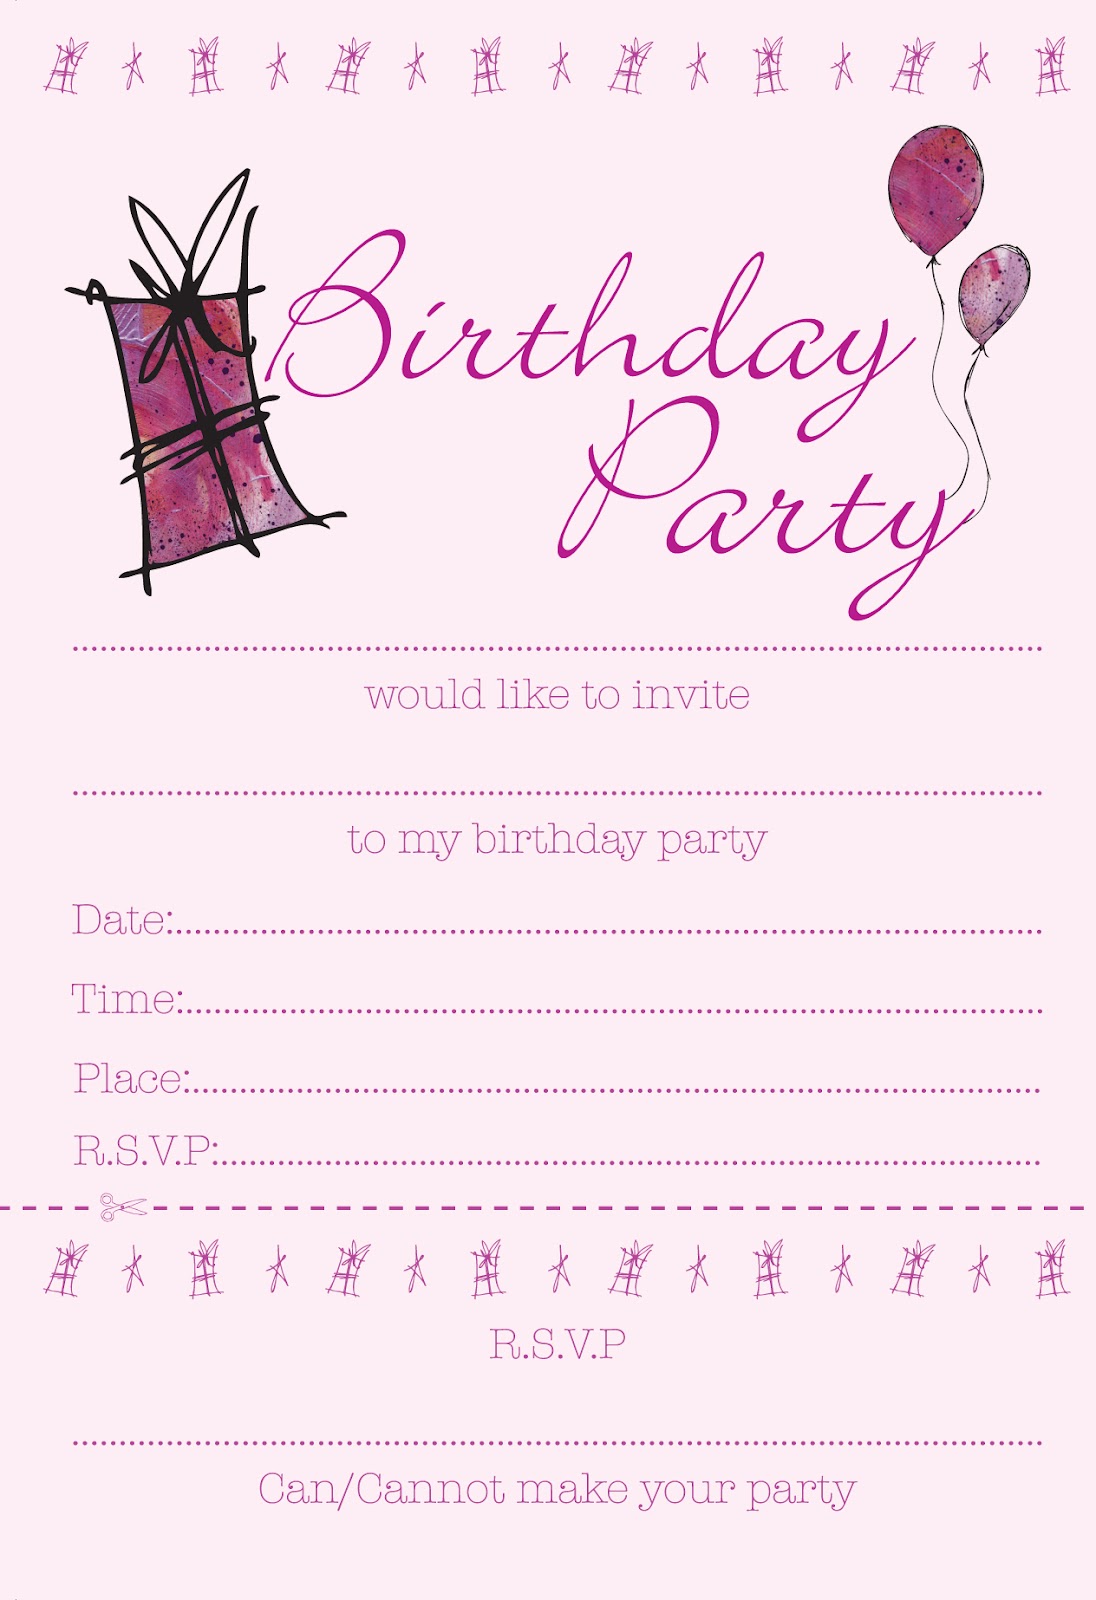 girls pink birthday party invitations size a5 20 invitations per pack 